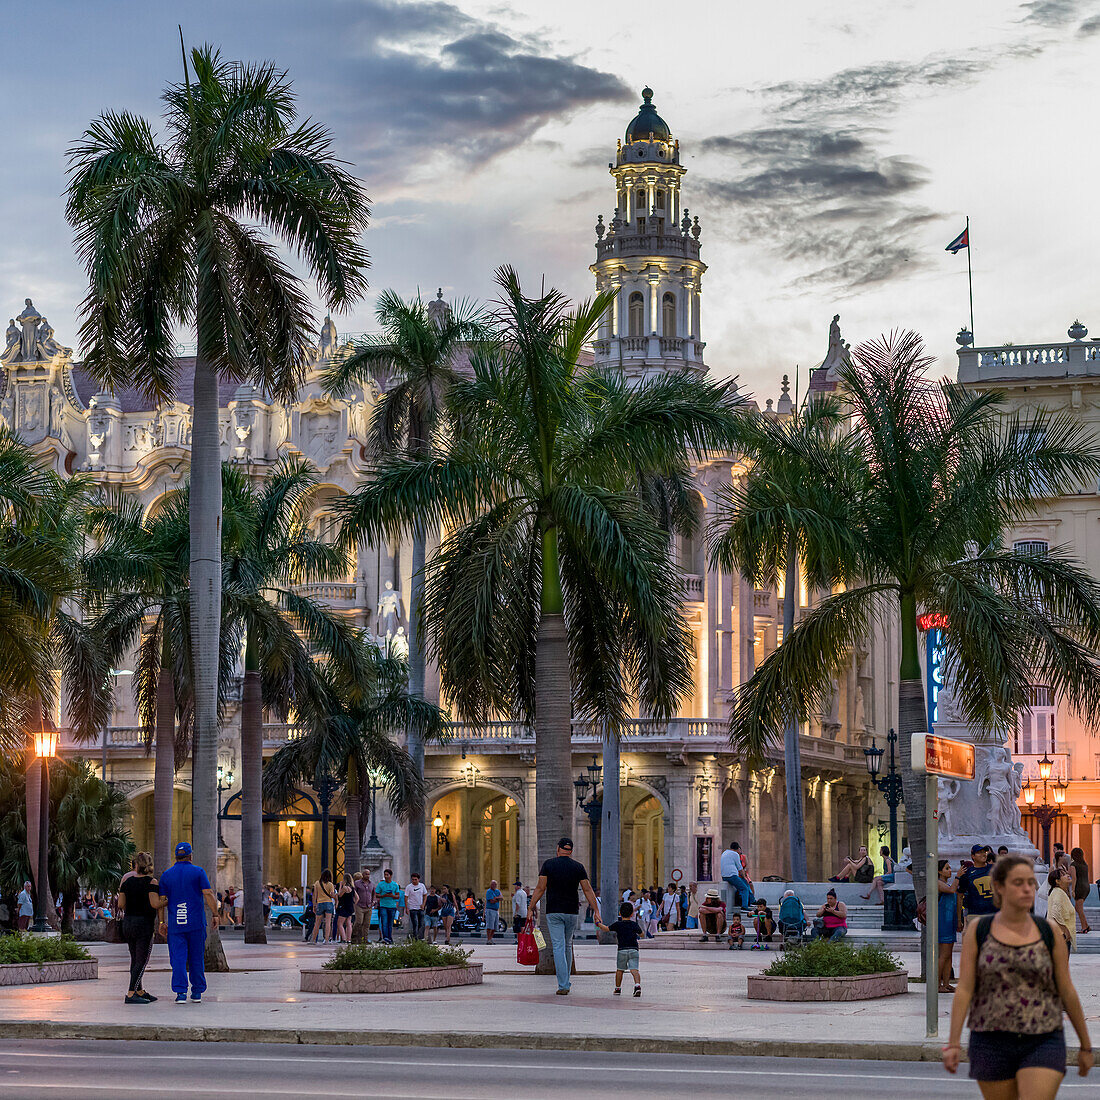 Pedestrians in a town square at dusk with palm trees and a tower in the distance; Havana, Cuba